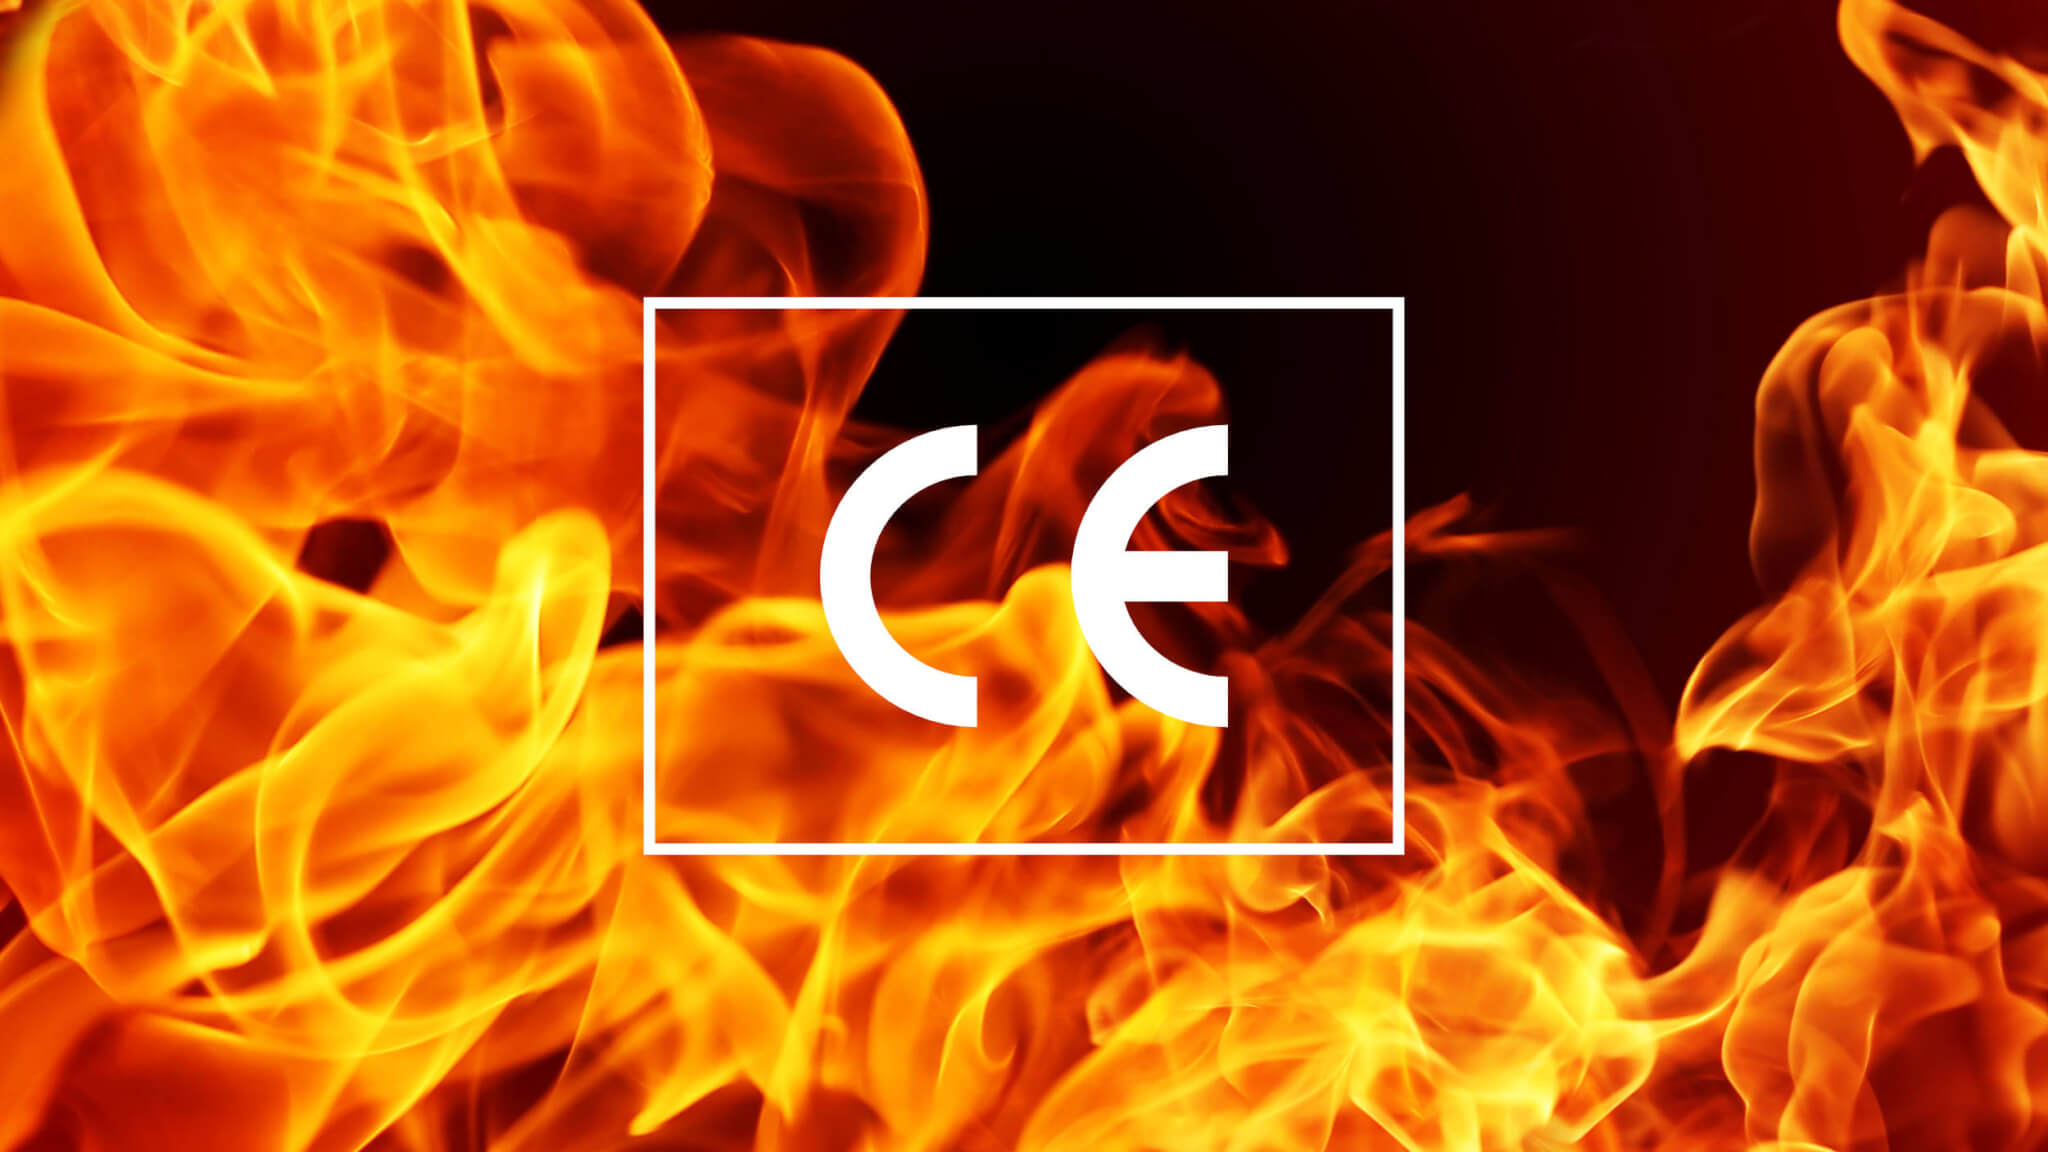 All Heinen products have CE marking